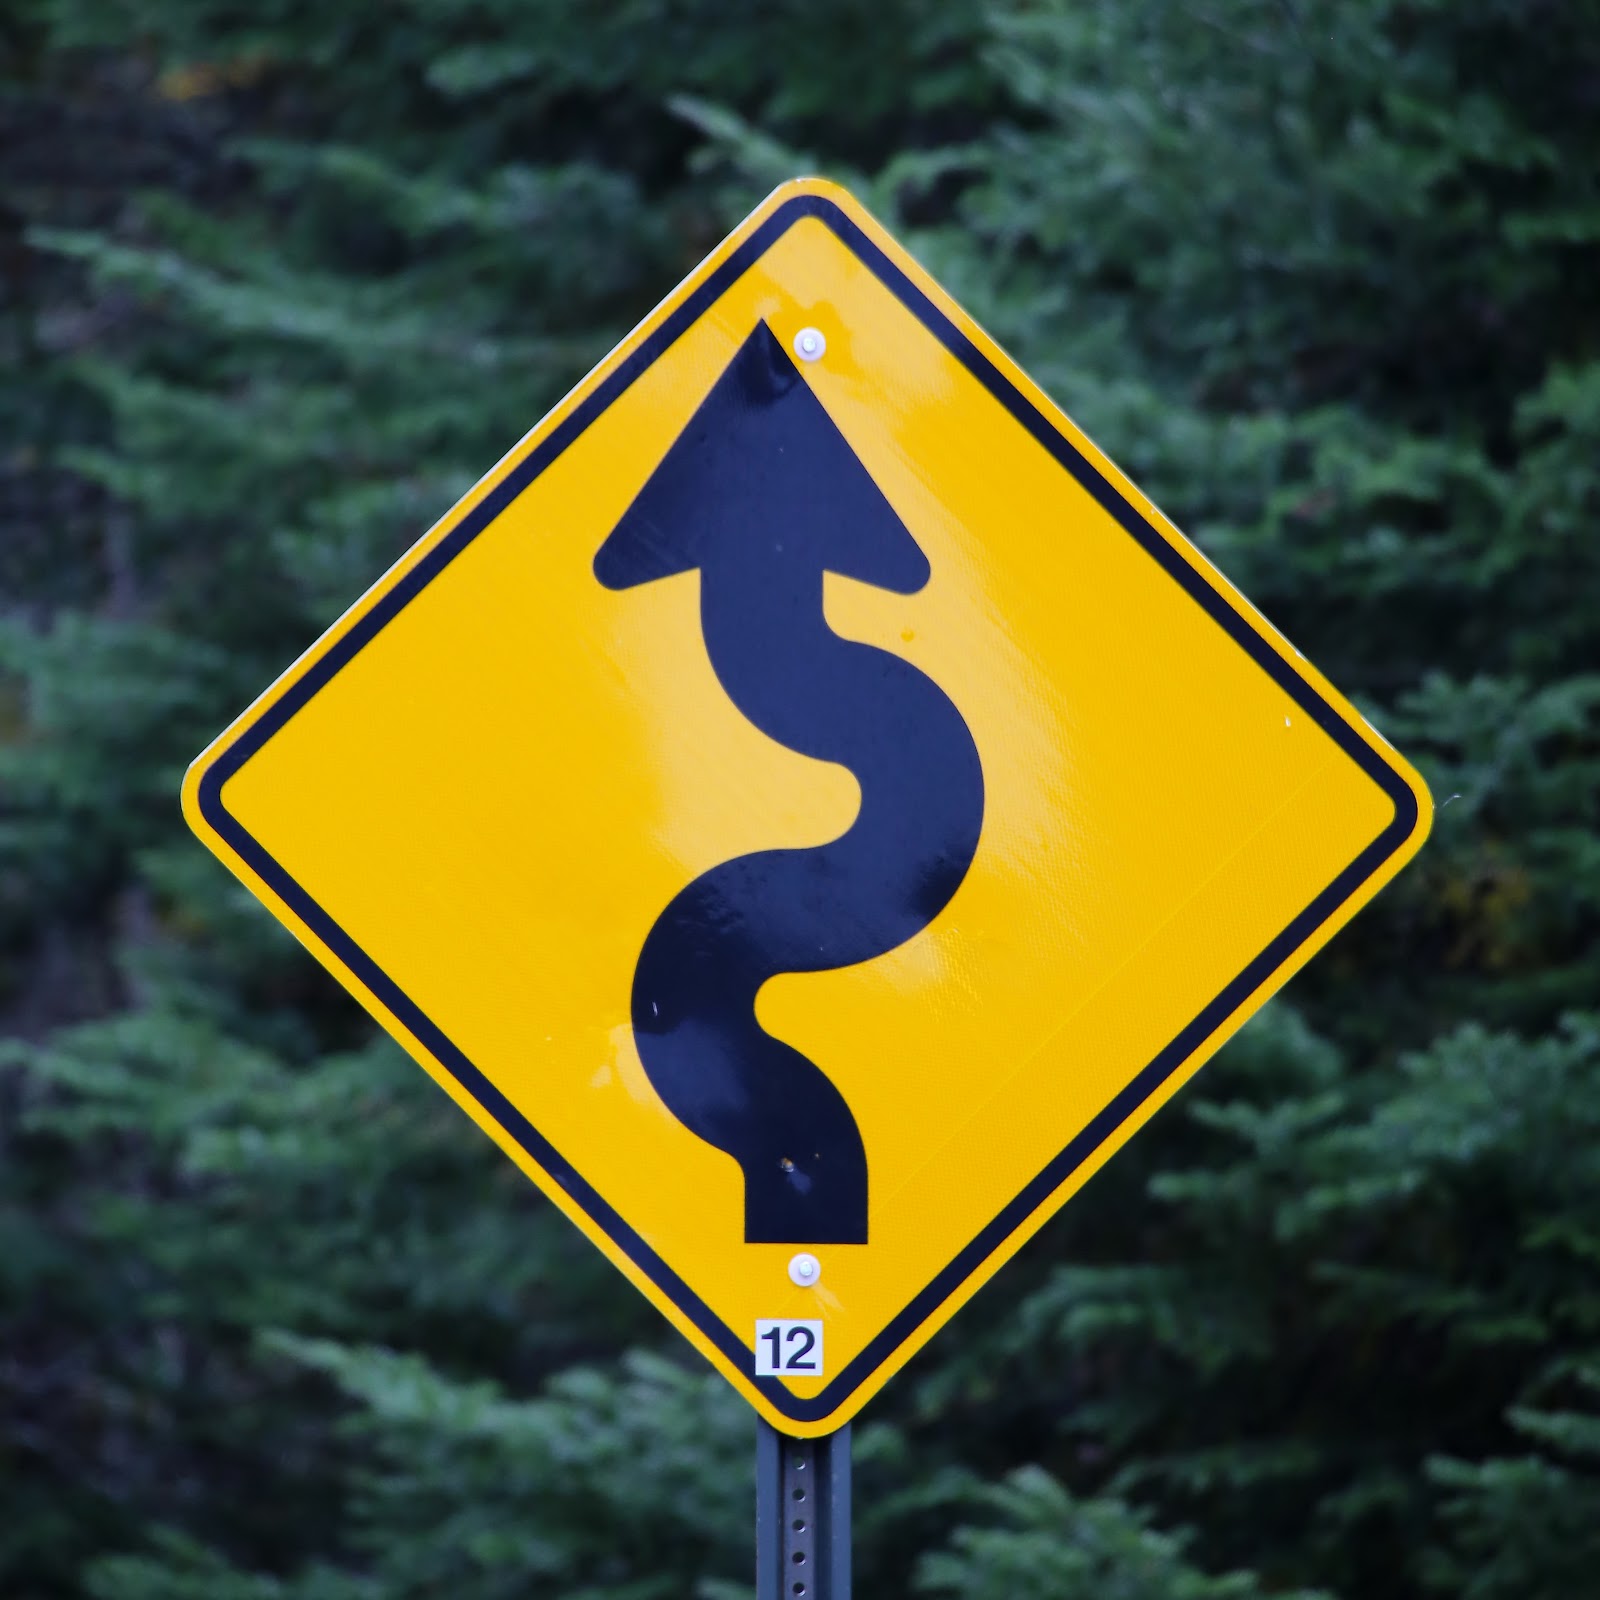 Picture of a yellow road sign indicating many turns ahead